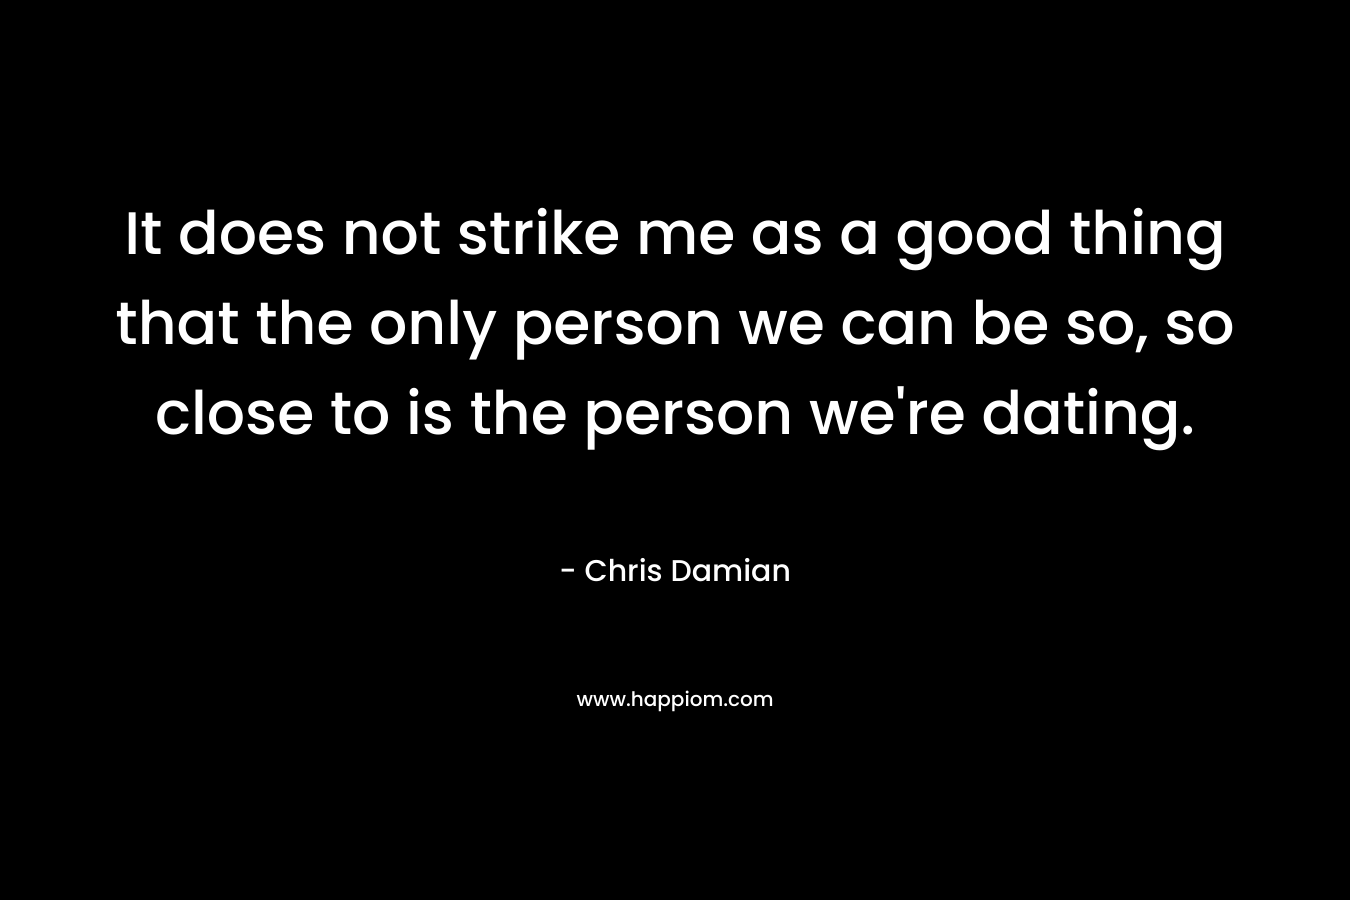 It does not strike me as a good thing that the only person we can be so, so close to is the person we’re dating. – Chris Damian